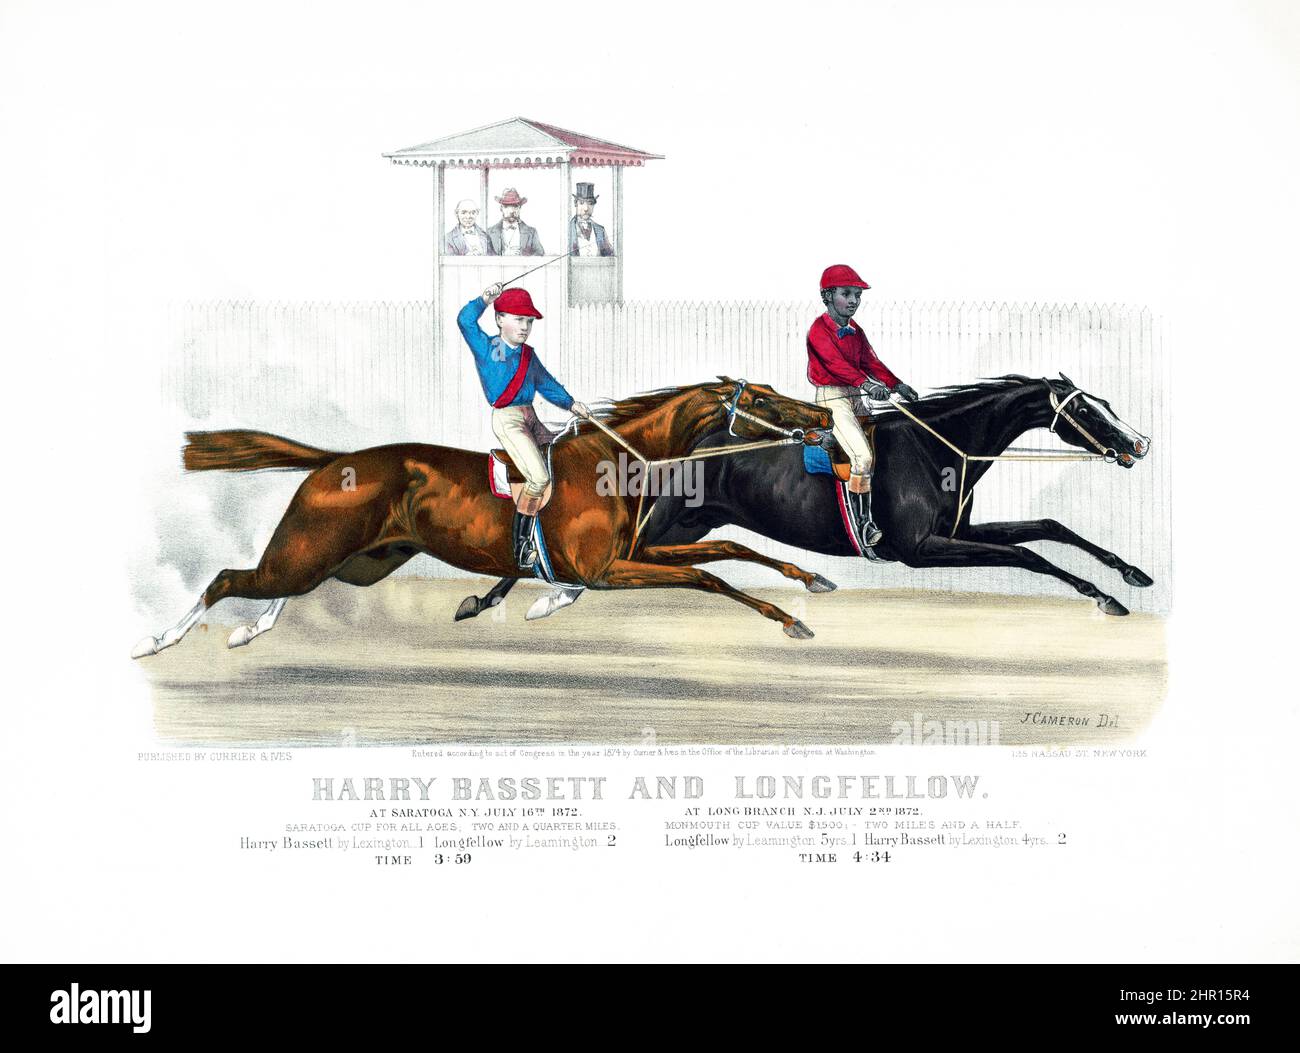 Harry Bassett and Longfellow at Saratoga, N.Y., July 16th 1872 Lithographs--Hand-colored 1874. Artwork by John Cameron. Published by Currier & Ives. Stock Photo